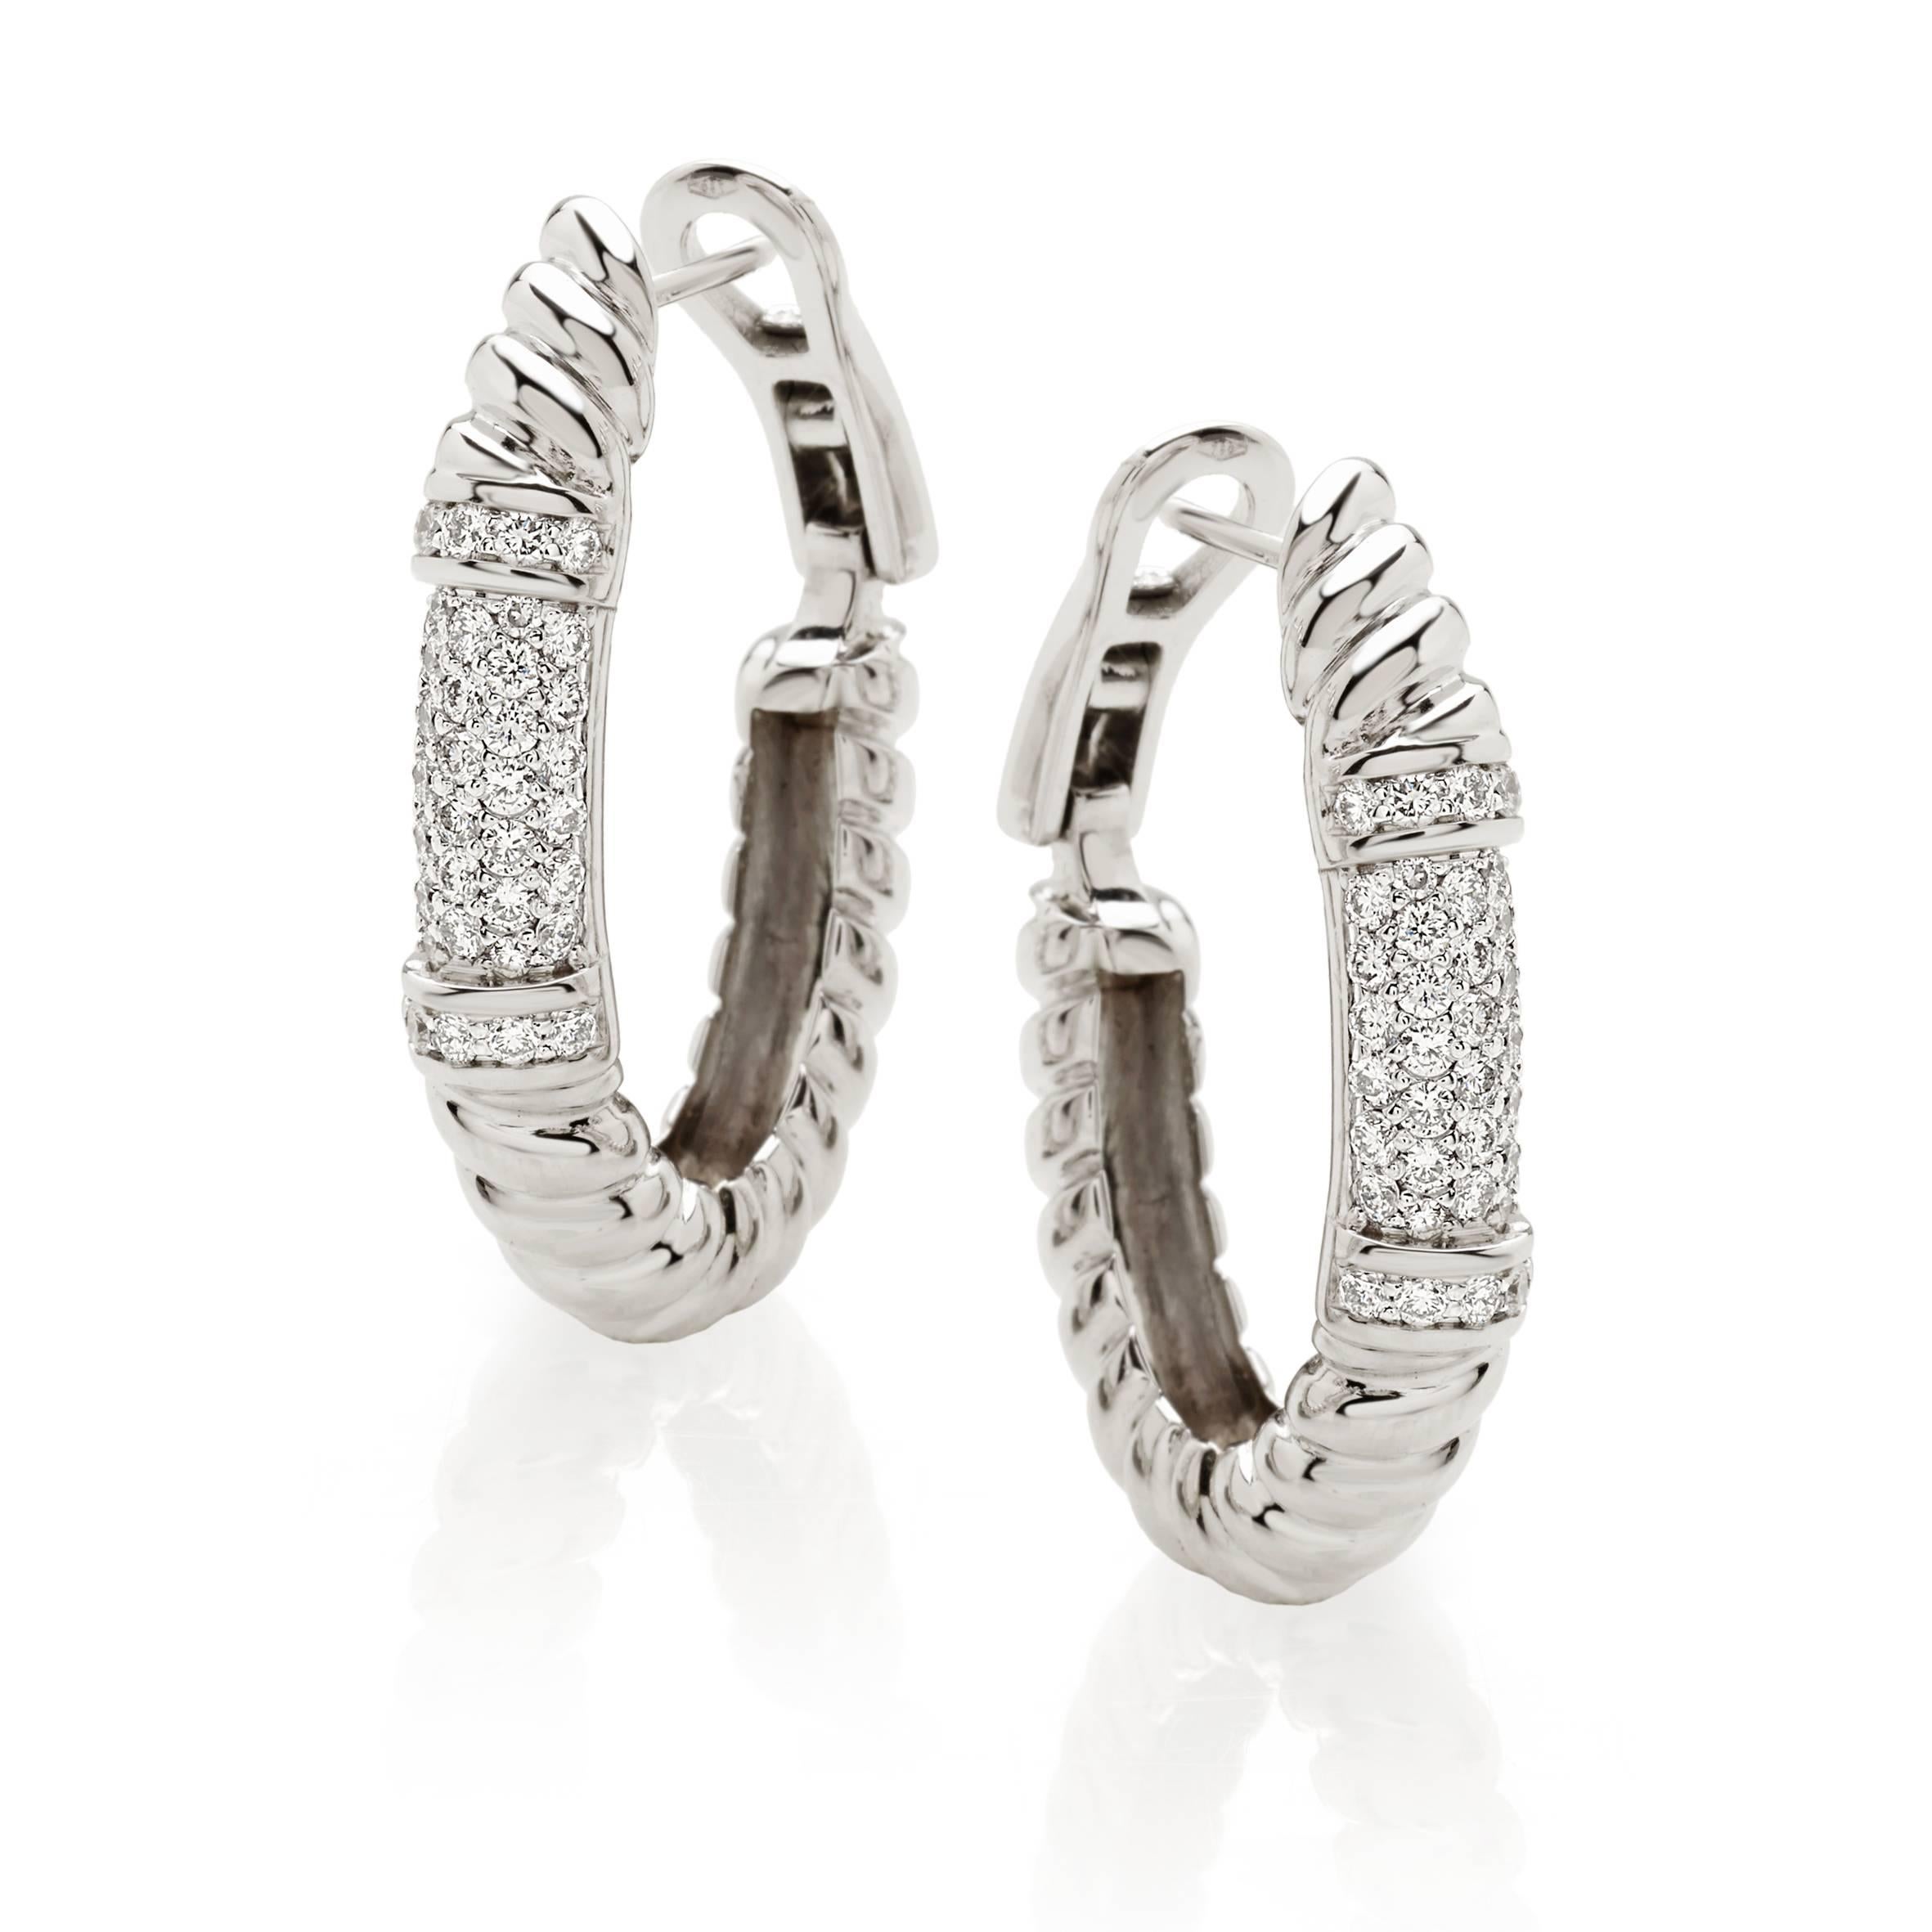 Rope earrings in 18 kt  white gold and white diamonds 
This is a traditional collection in Micheletto 

the total weight of the gold is  gr 18.90
the total weight of the white diamonds is ct 1.23 - color GH clarity VVS1

STAMP: 10 MI ITALY 750

The